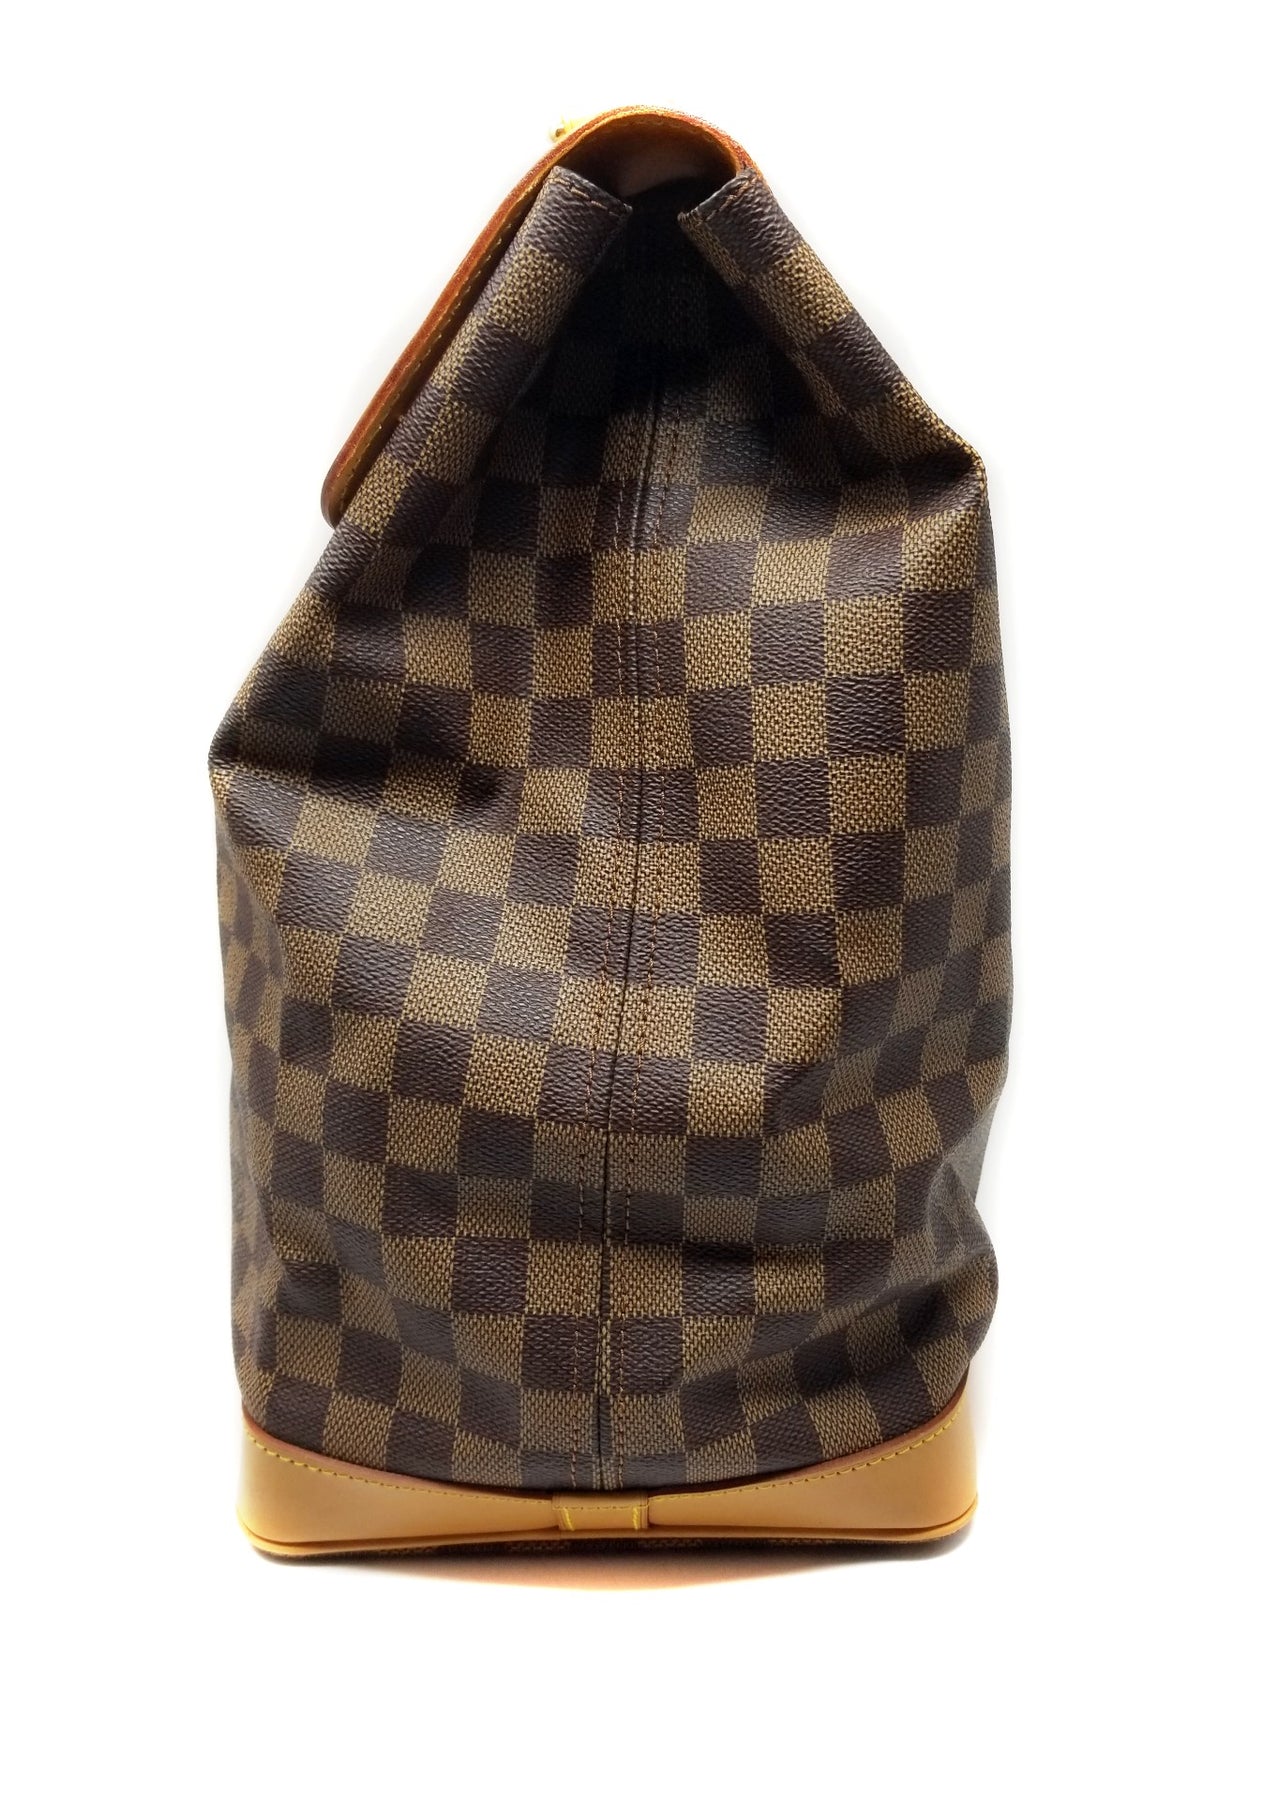 Louis Vuitton Monogram Alma MM  The Palm Beach Trunk Designer Resale and  Luxury Consignment